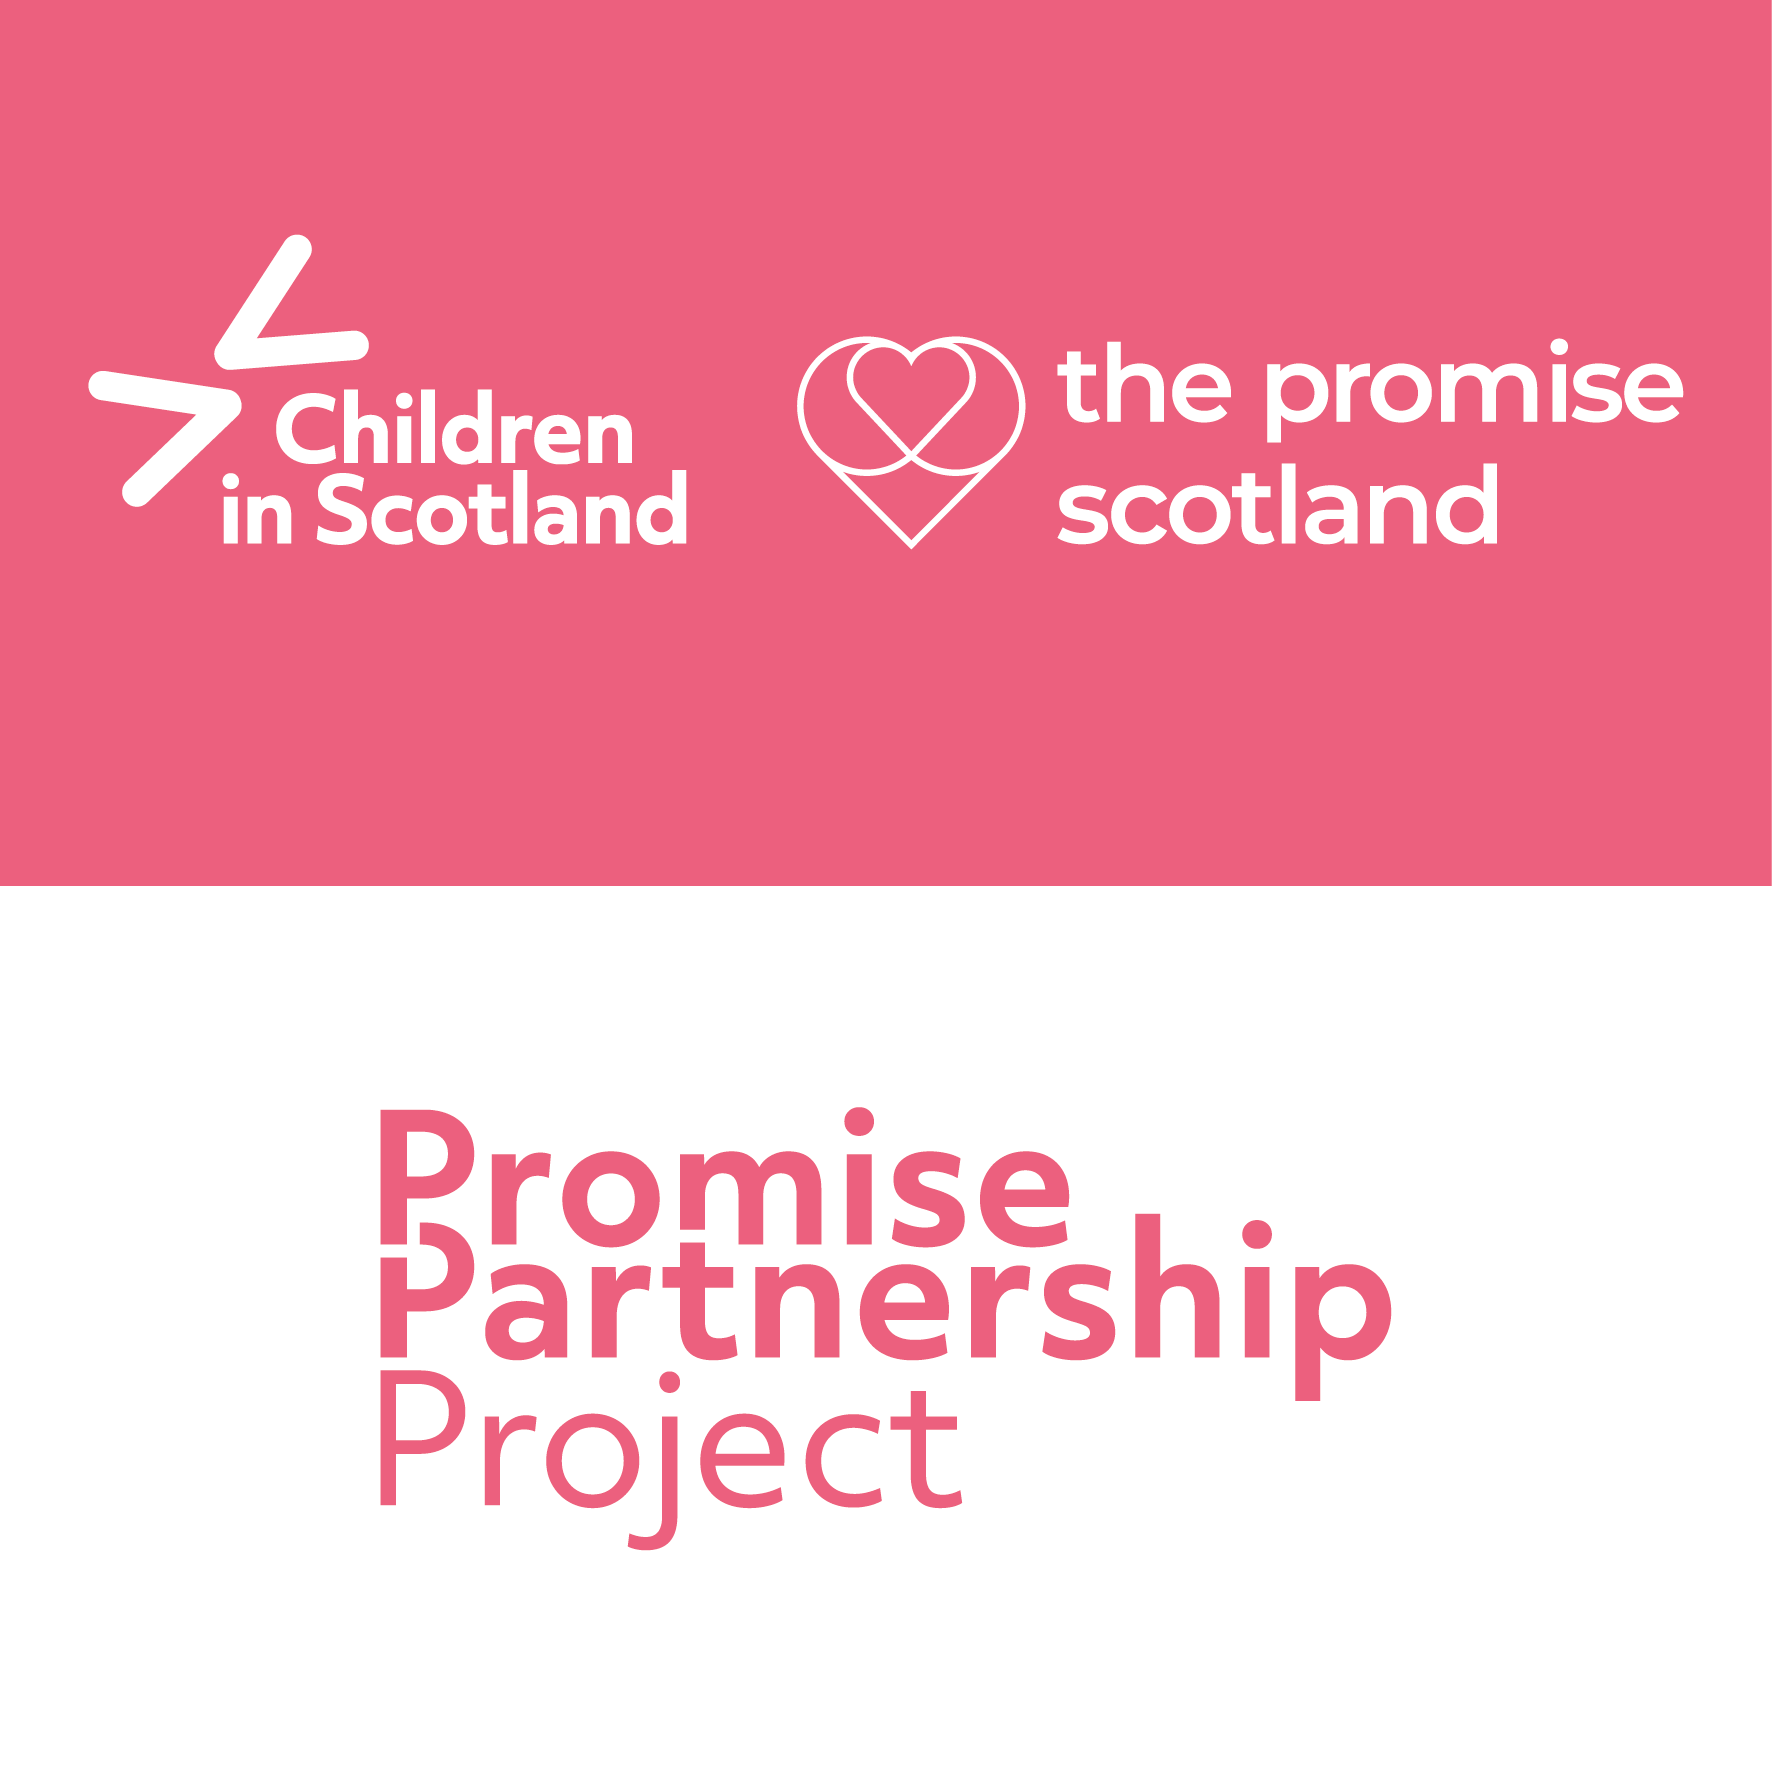 White logos of Children in Scotland and The Promise on a pink background above pink text on a white background. Text says Promise Partnership Project